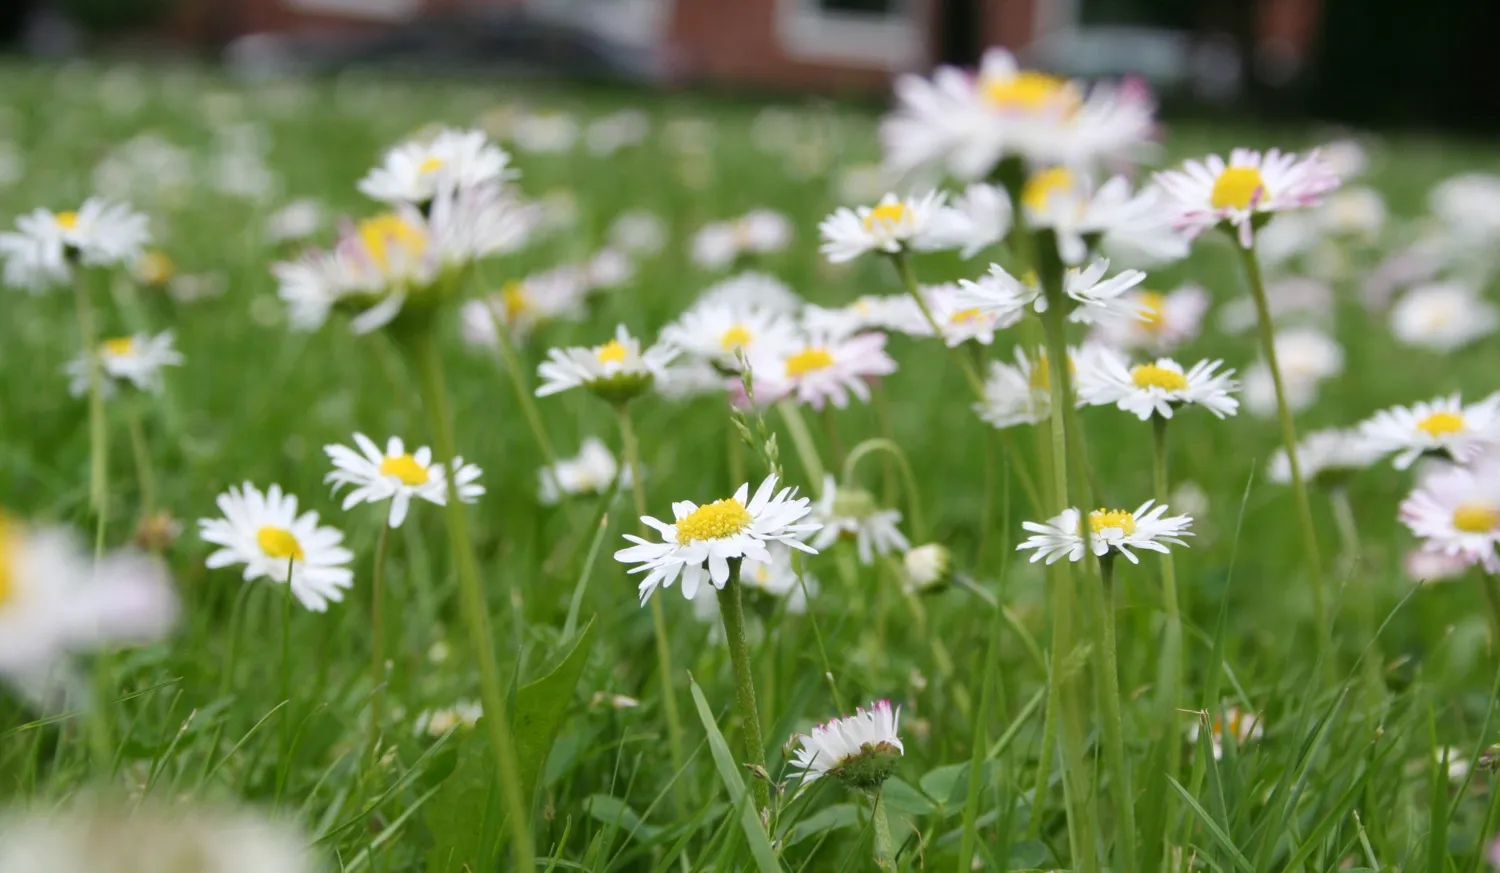 A meadow of daises.